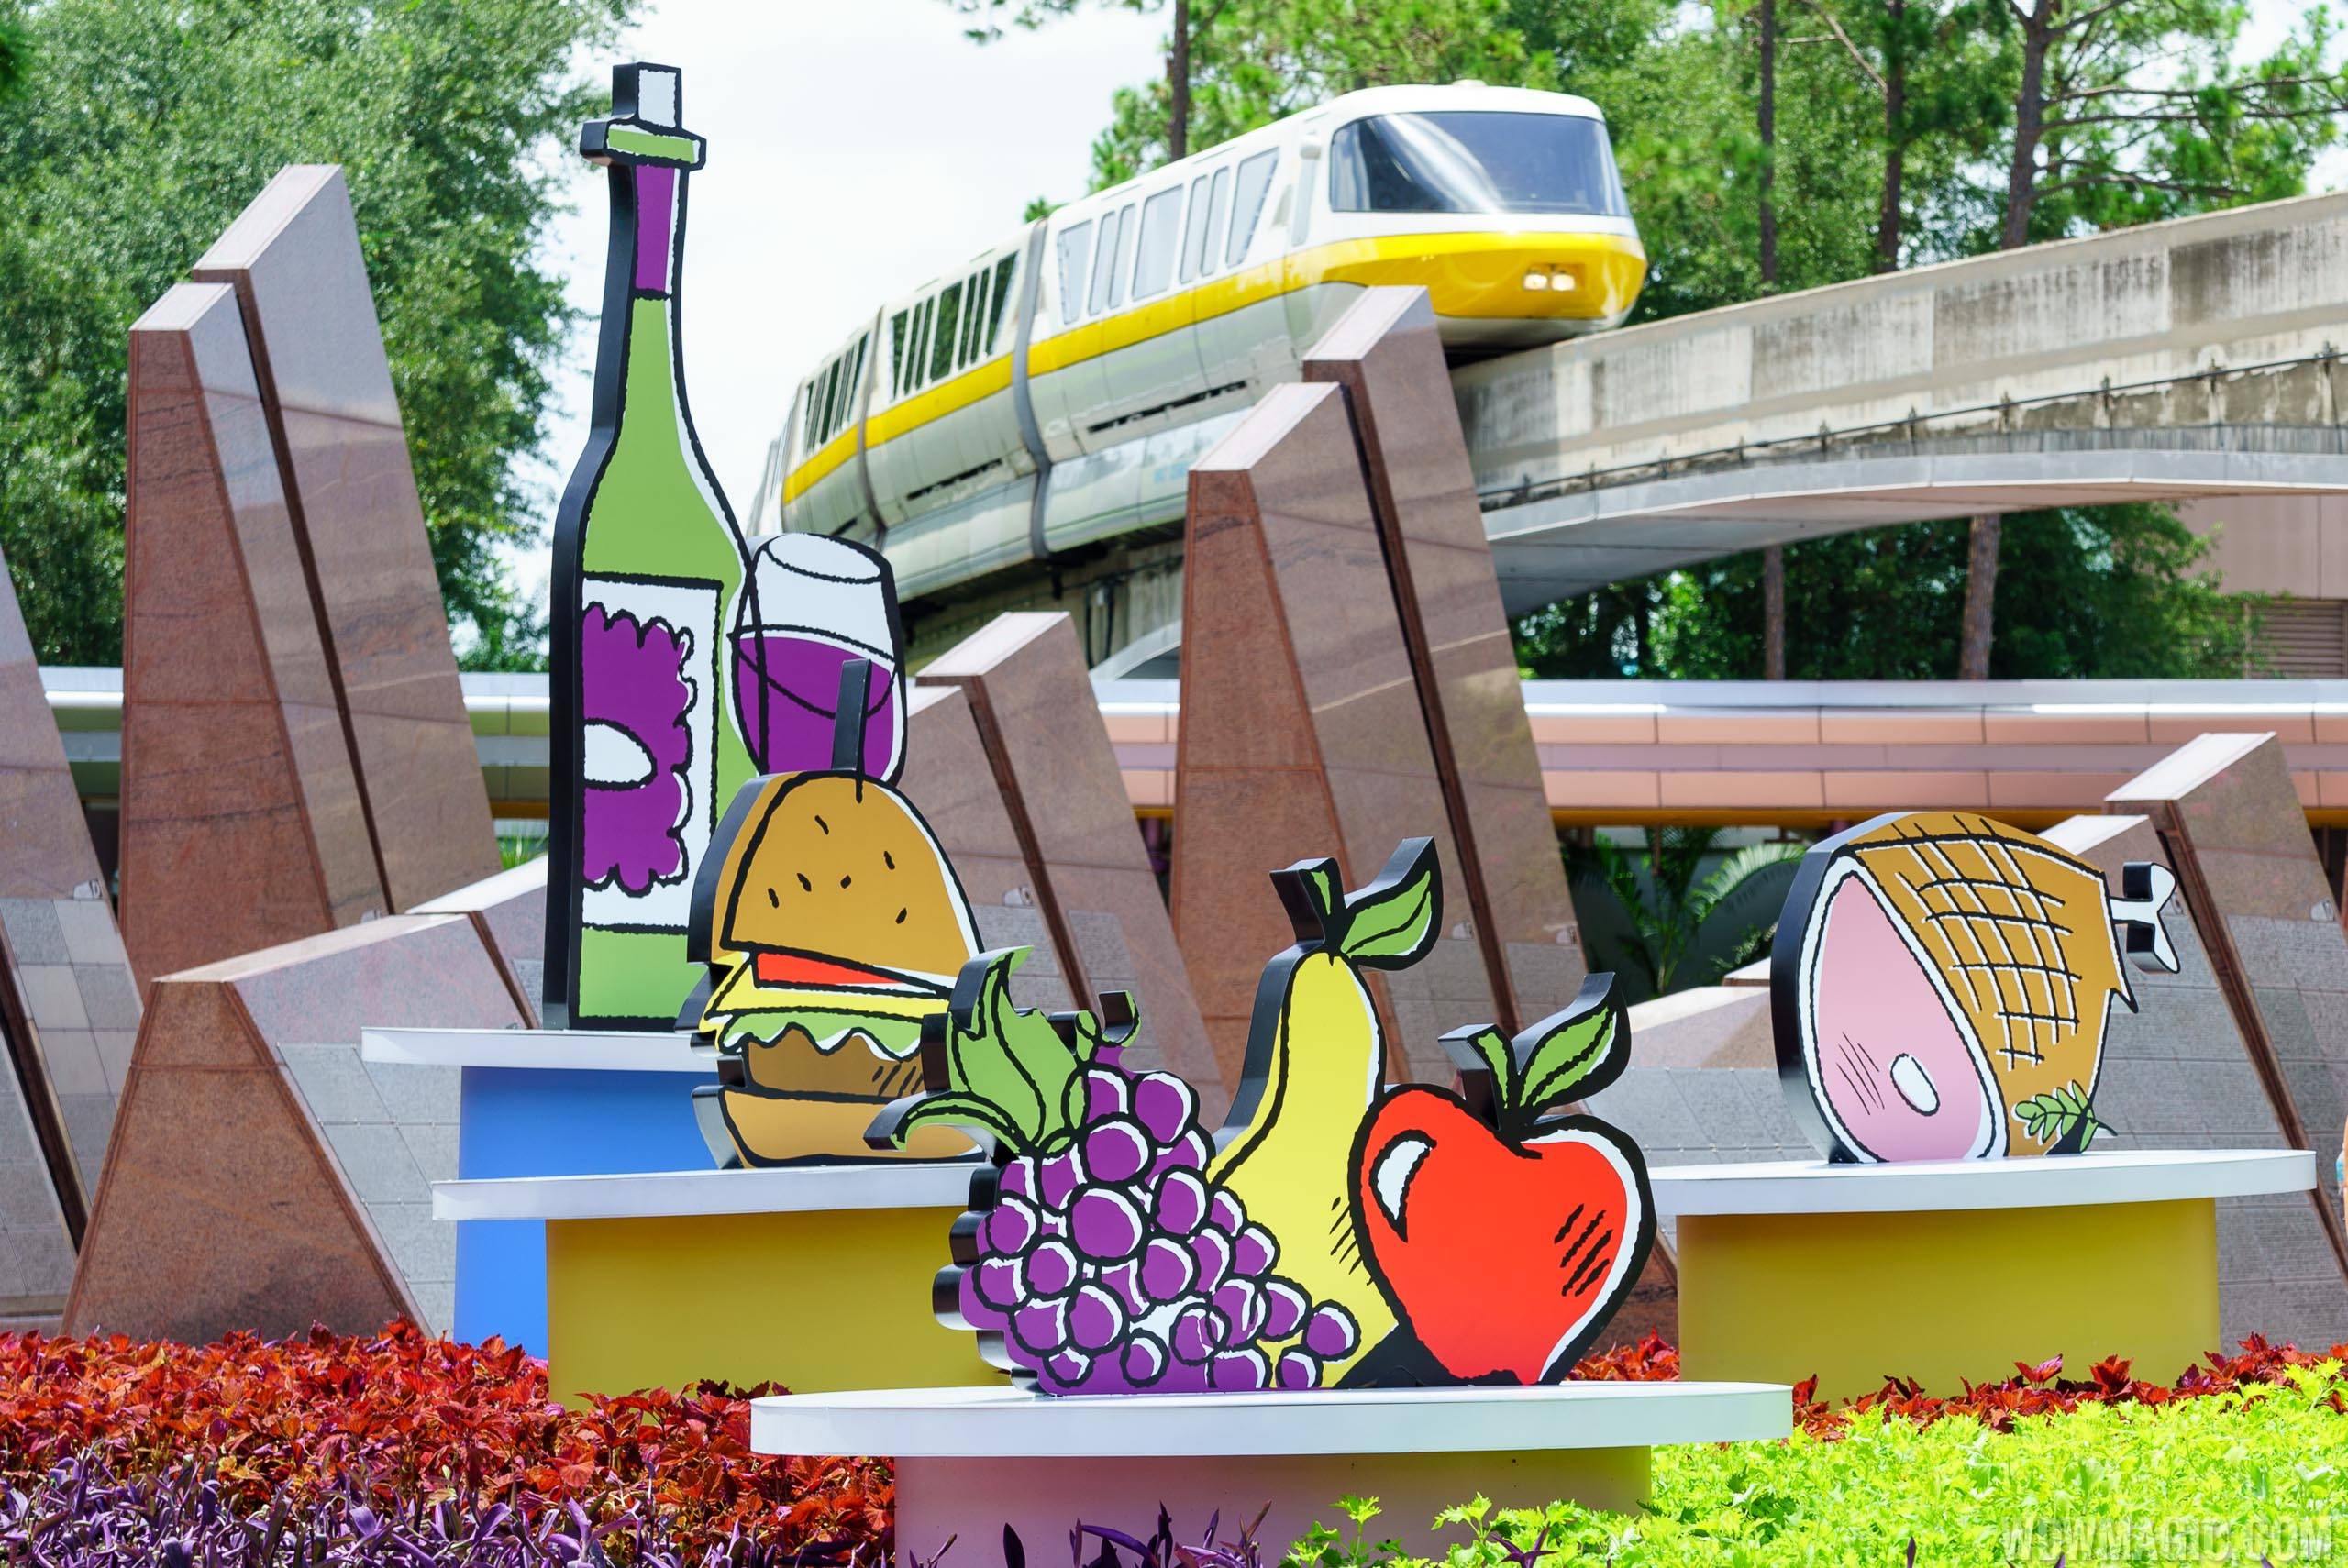 2017 Epcot International Food and Wine Festival main entrance display